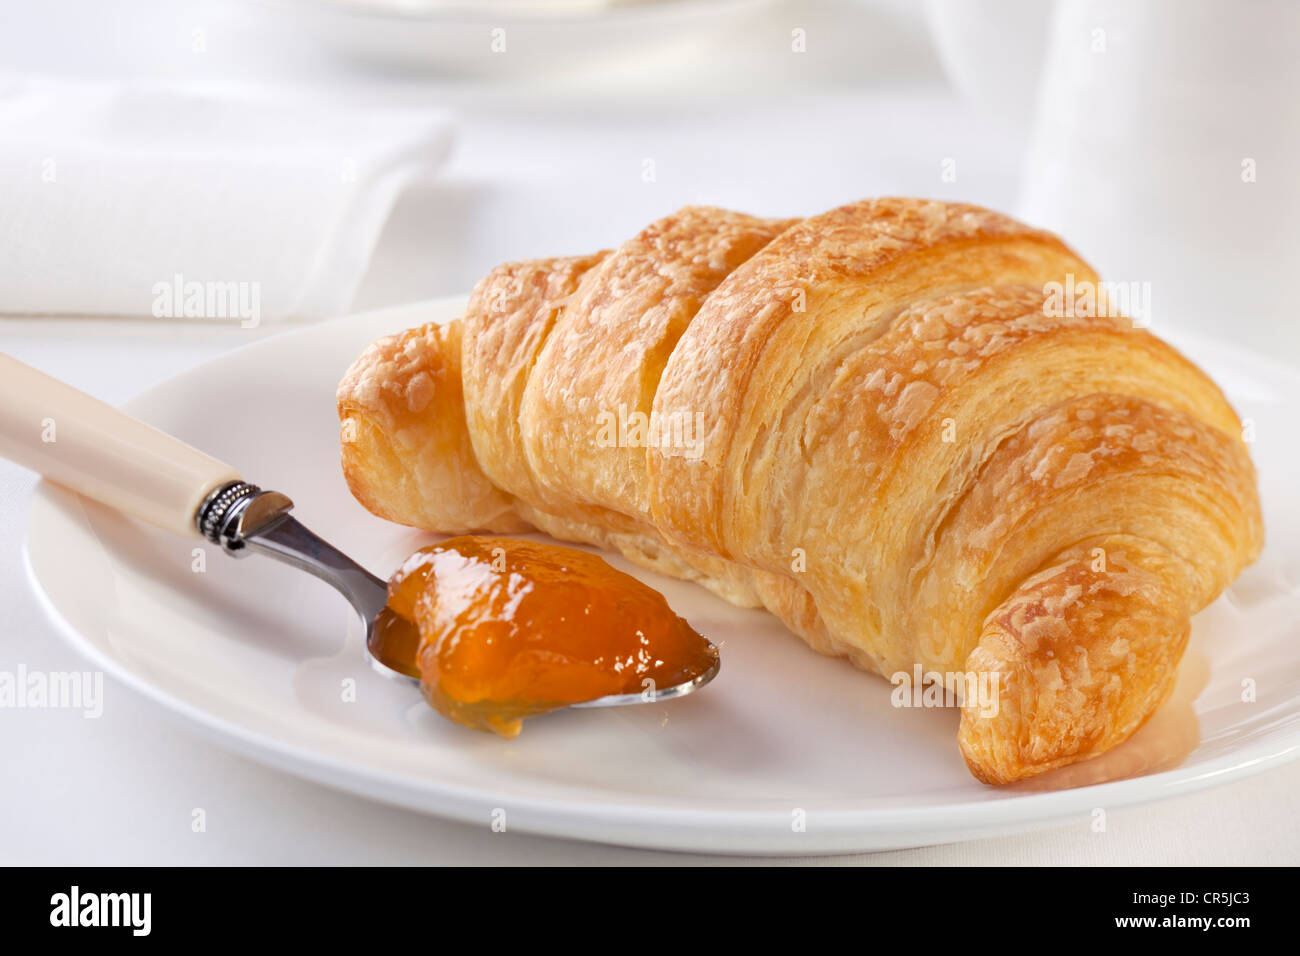 Croissant with apricot jam, with white accessories. A beautiful breakfast! Stock Photo